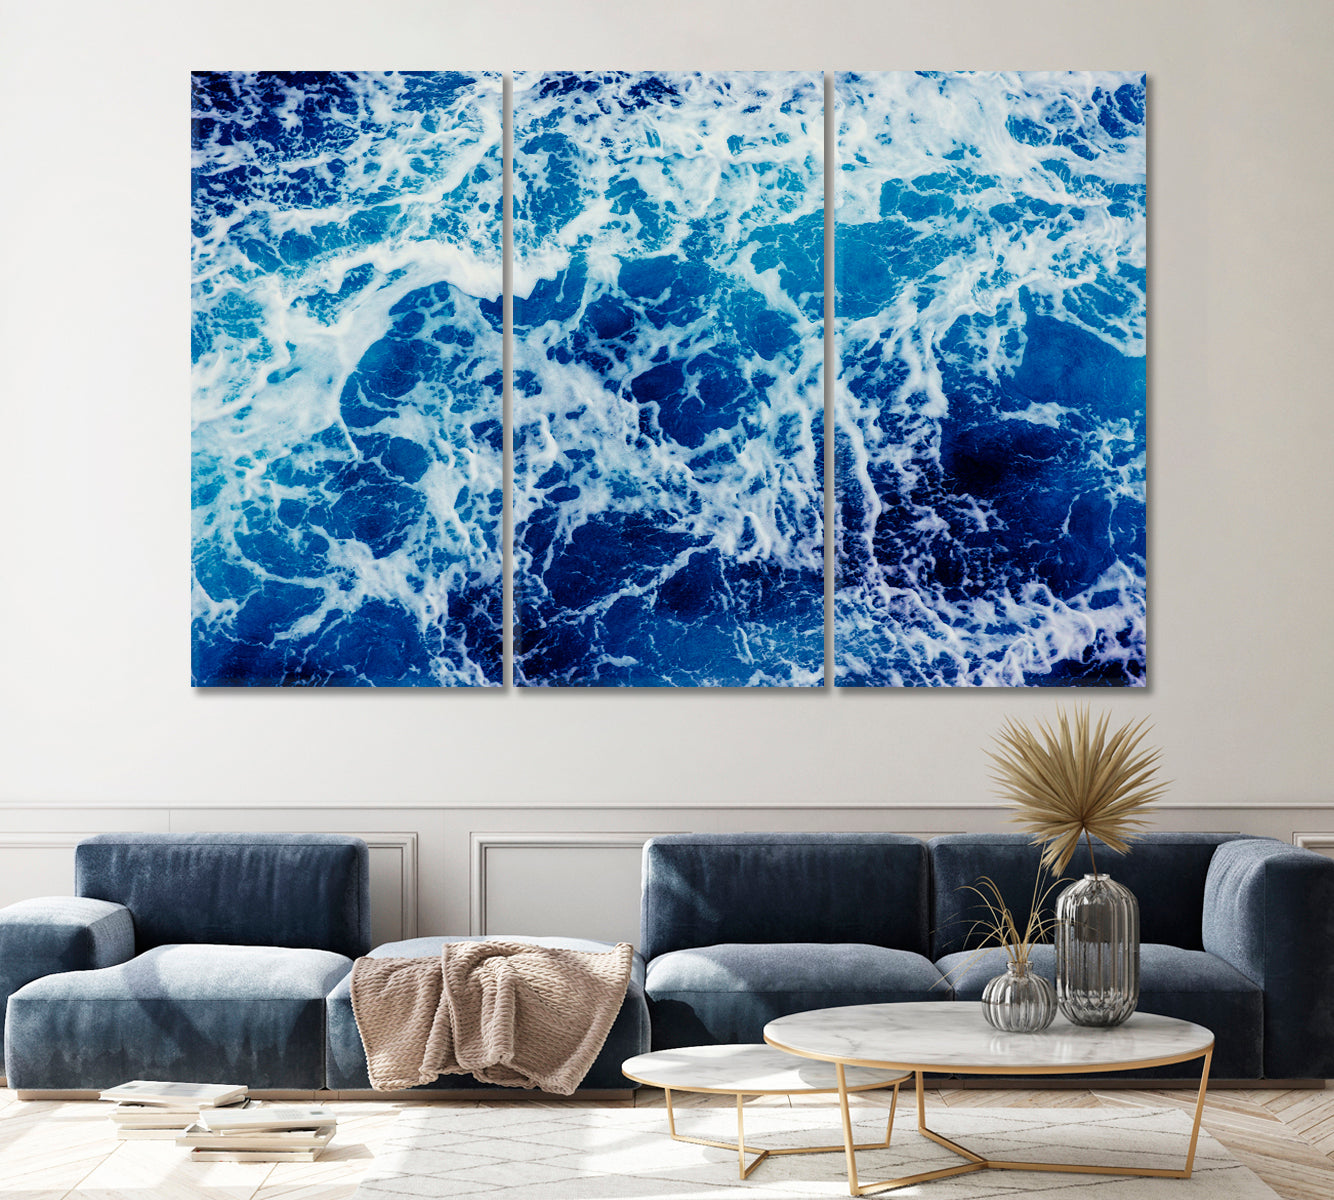 Blue Sea Waves Canvas Print ArtLexy 3 Panels 36"x24" inches 